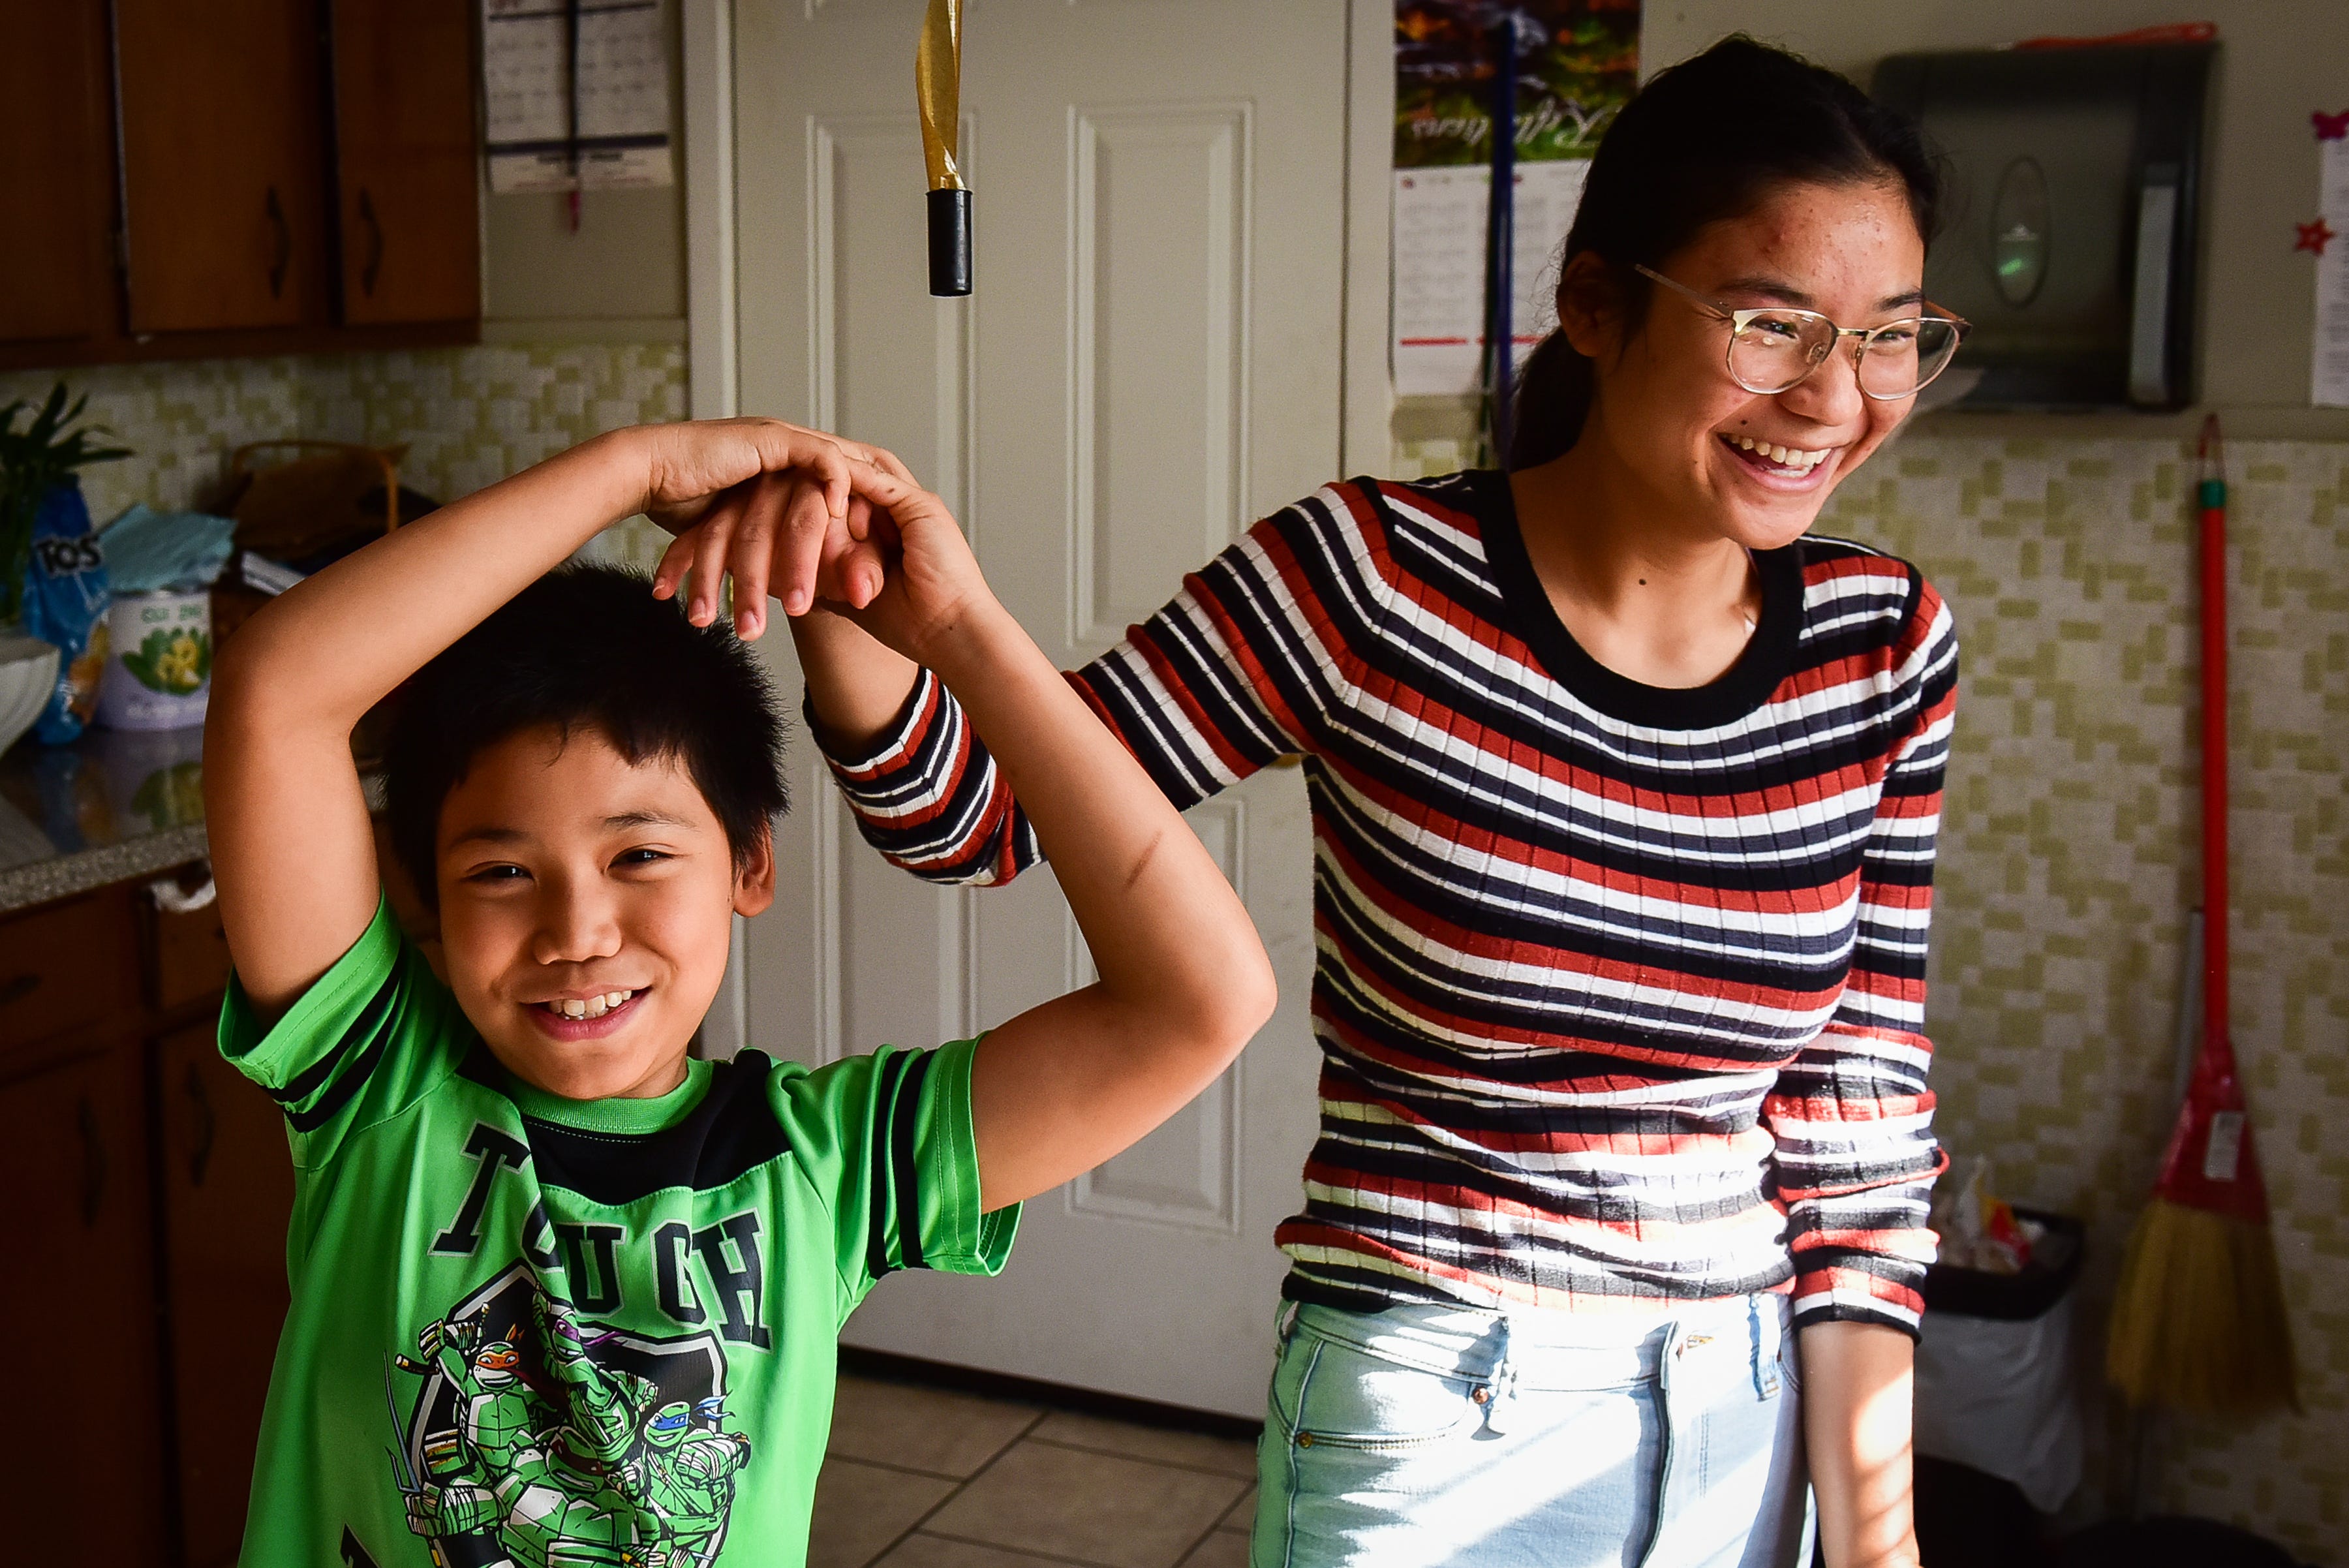 From left, Saw Kler Kaw Htoo plays with his older sister Kler Moo Paw as their family prepares dinner in the kitchen on Sunday, Oct. 25, 2020 at their home on Utica.